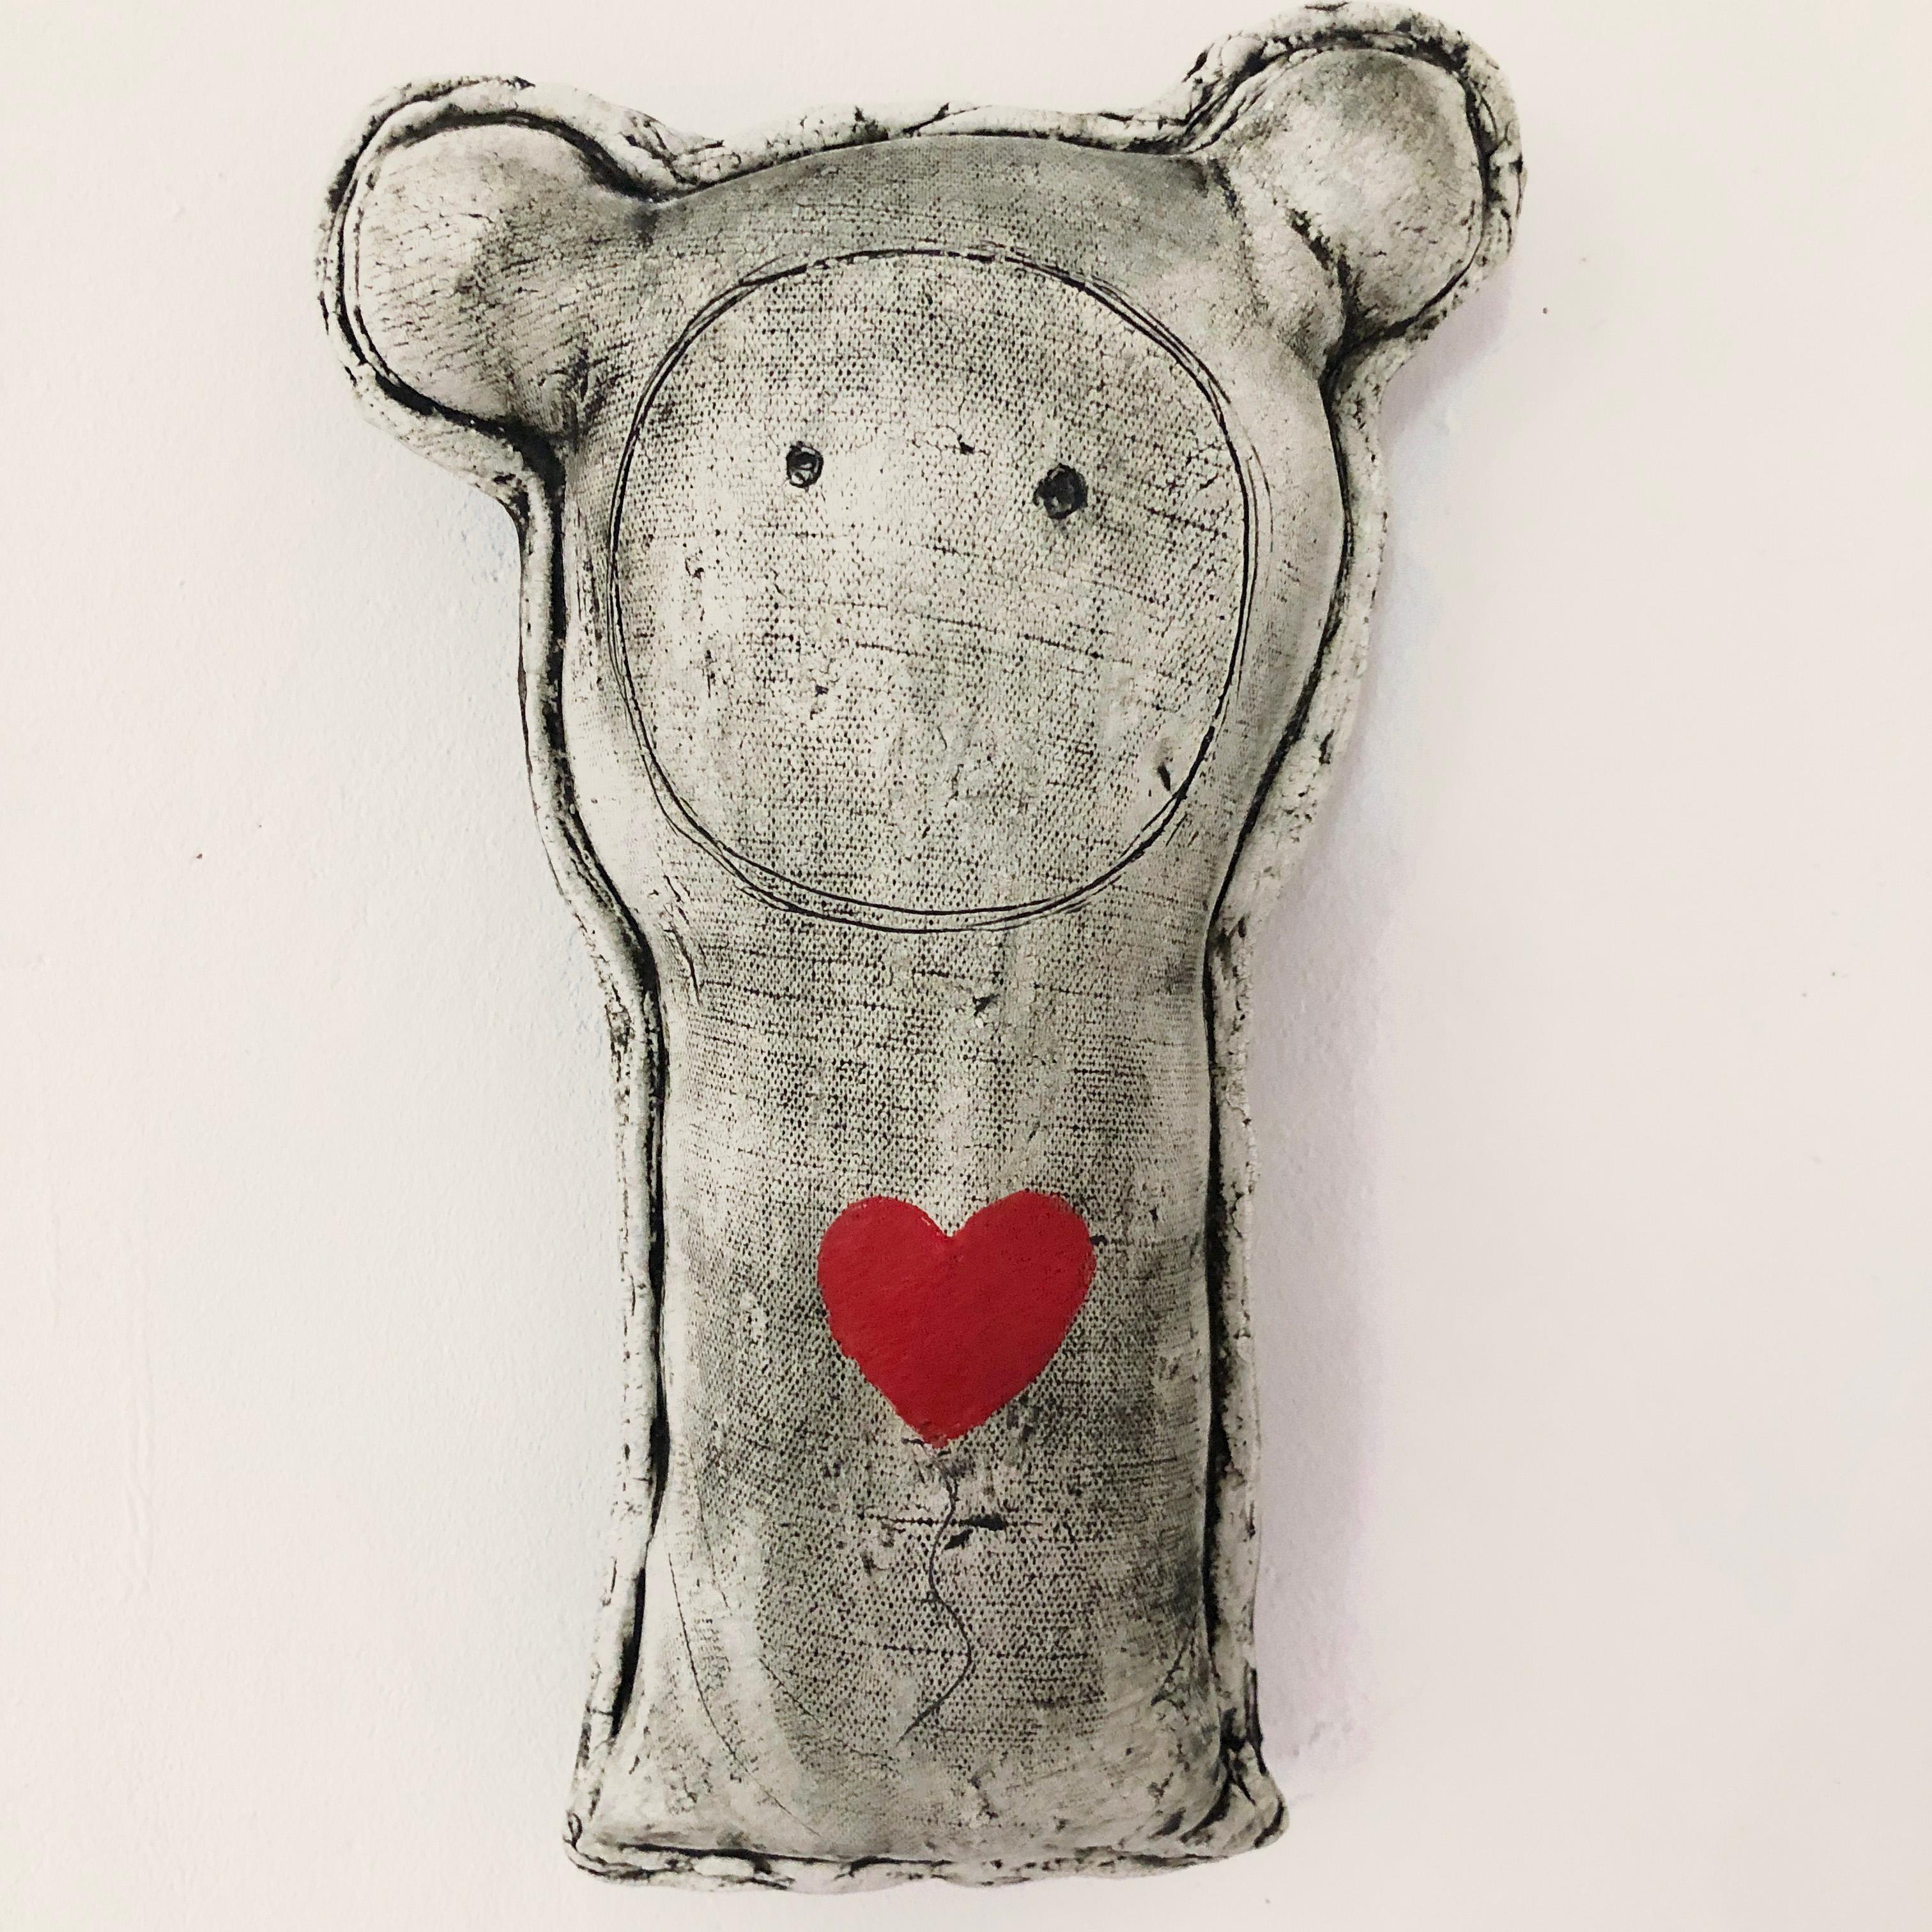 Renate Frotscher Figurative Sculpture - Théodore Archibald the first or simply "Teddy A" - Contemporary Ceramic Wall Art